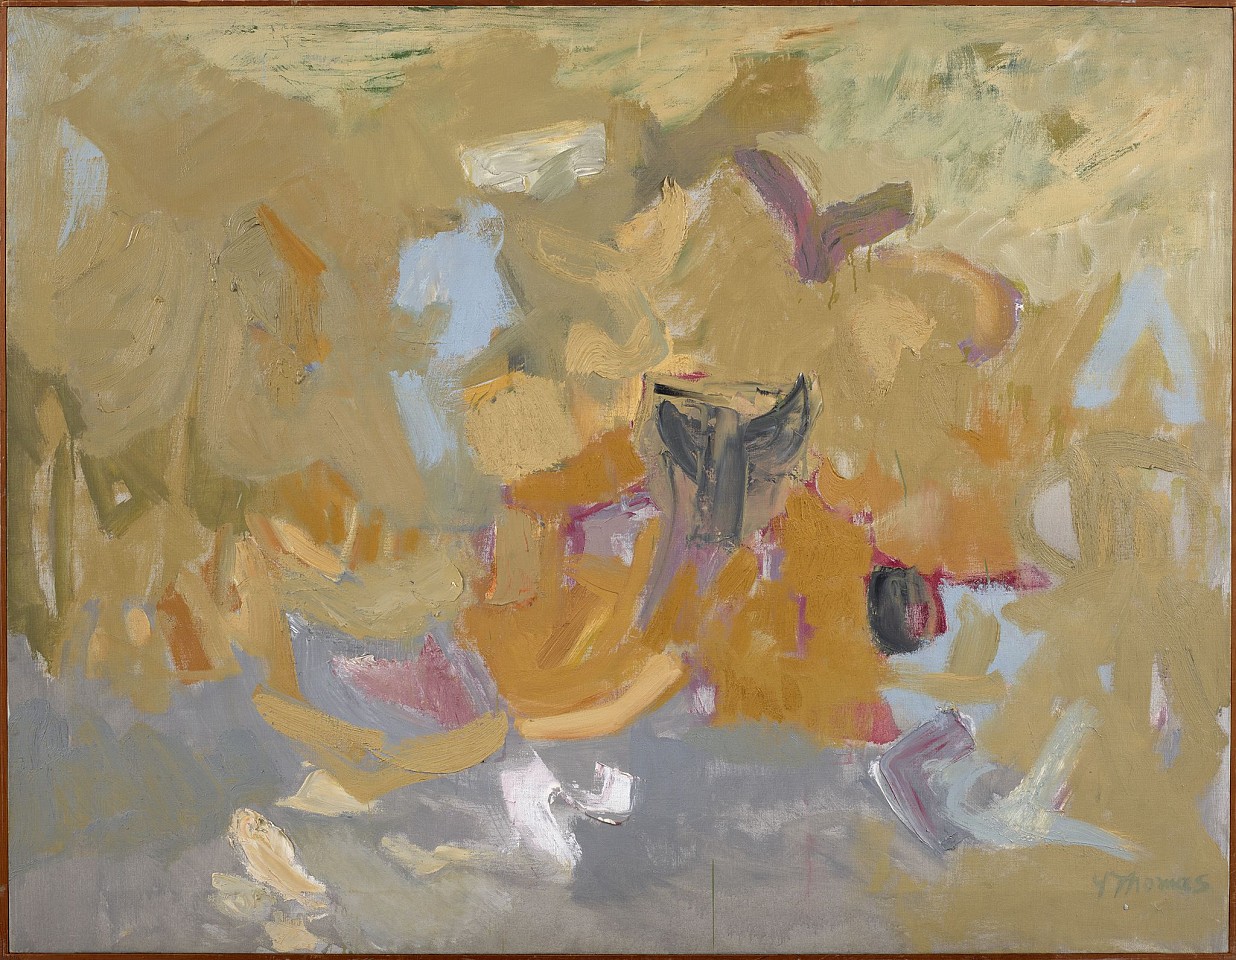 Yvonne Thomas, Exploration | SOLD, 1954
Oil on linen, 40 x 51 1/2 in. (101.6 x 130.8 cm)
THO-00116